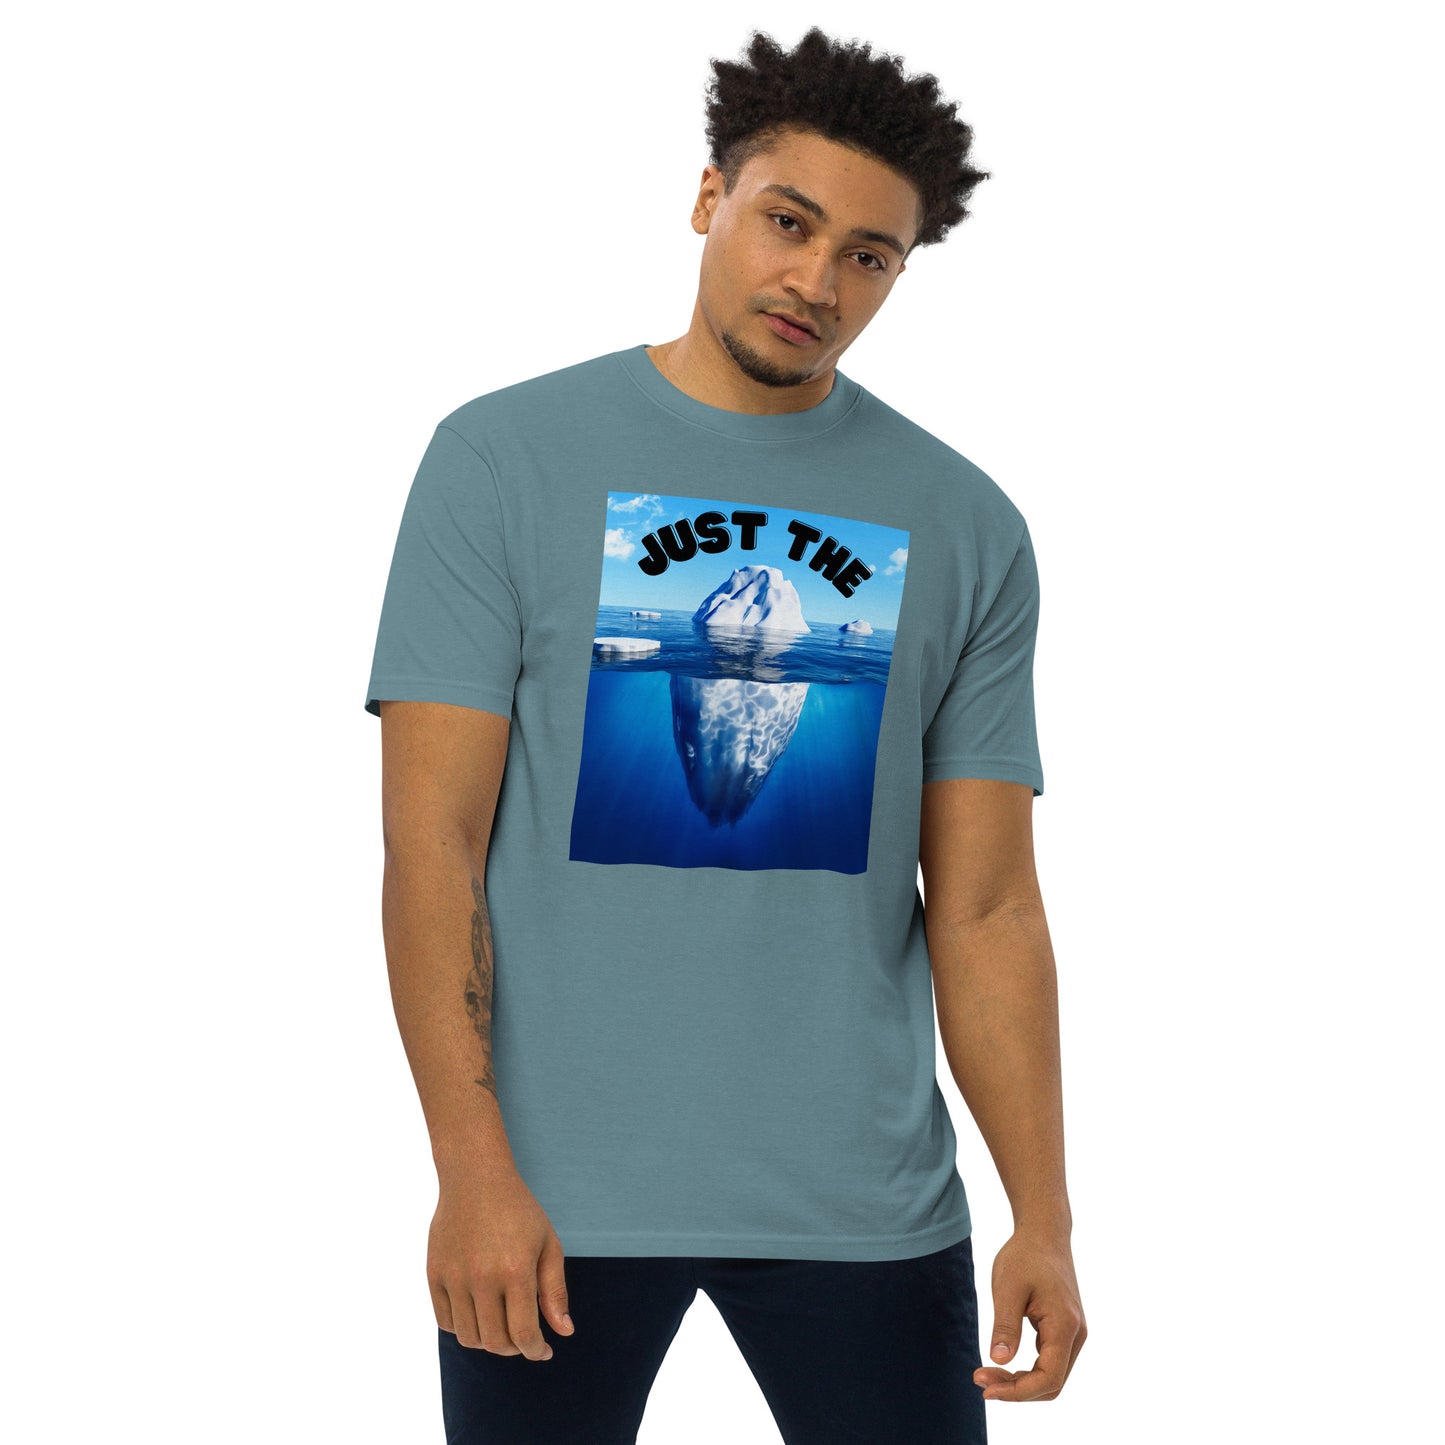 Just The ___! T-Shirt